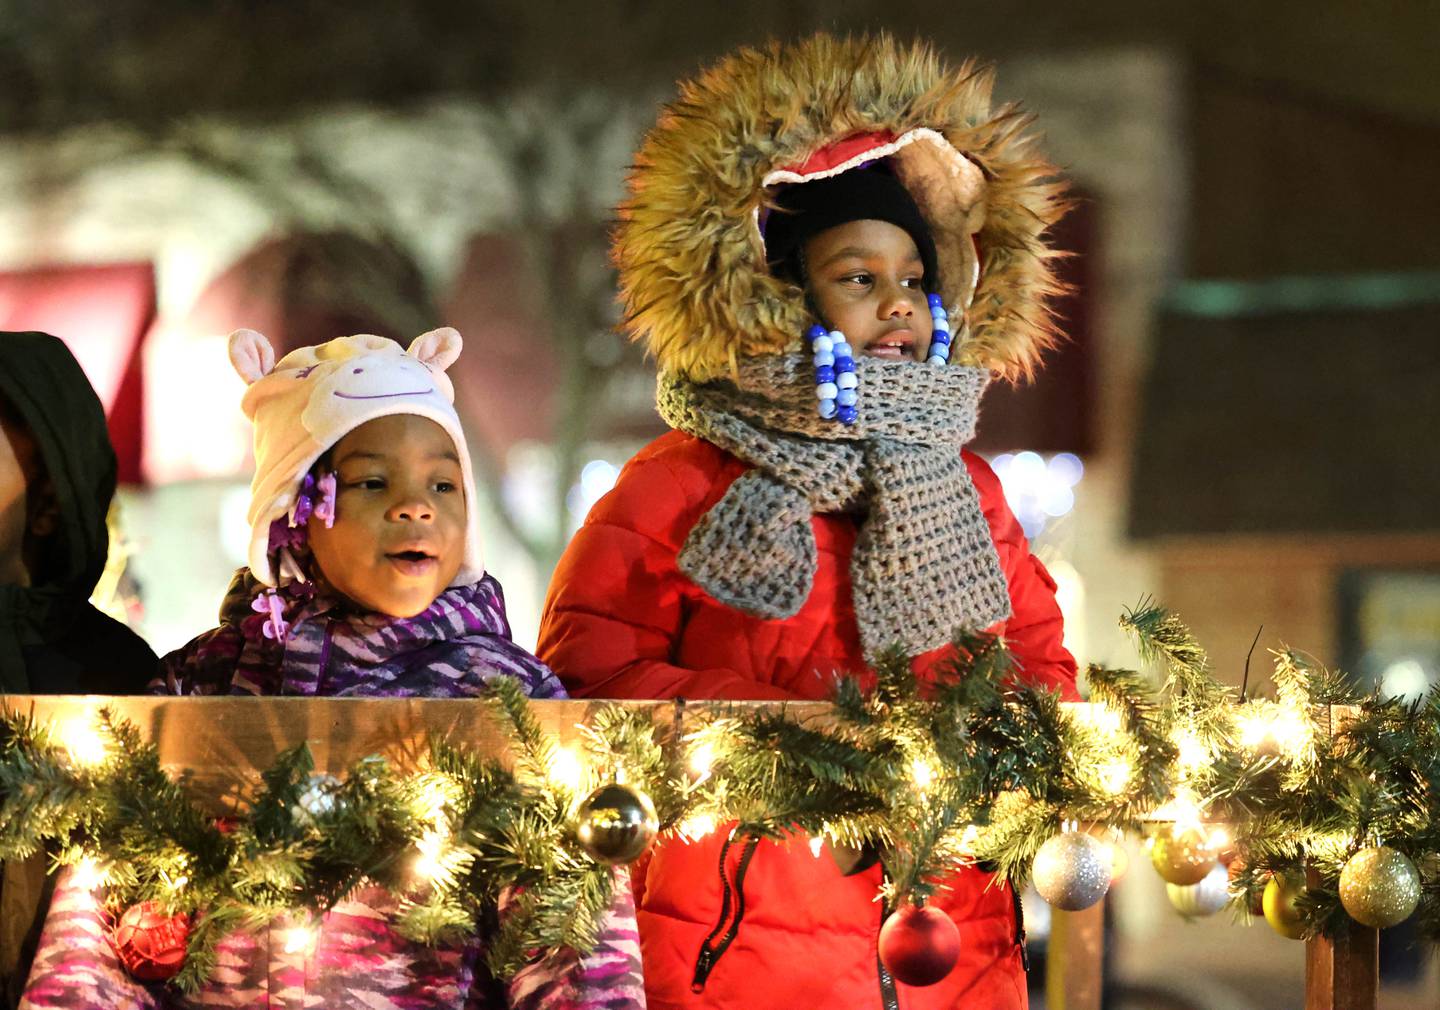 Eyanni Booker, (left) 3, and Faith Williams, 6, from DeKalb, sing carols as they wait for Santa at the Santa house near the Egyptian Theatre Thursday, Dec. 1, 2022, during the DeKalb Chamber of Commerce Lights on Lincoln and Santa Comes to Town.